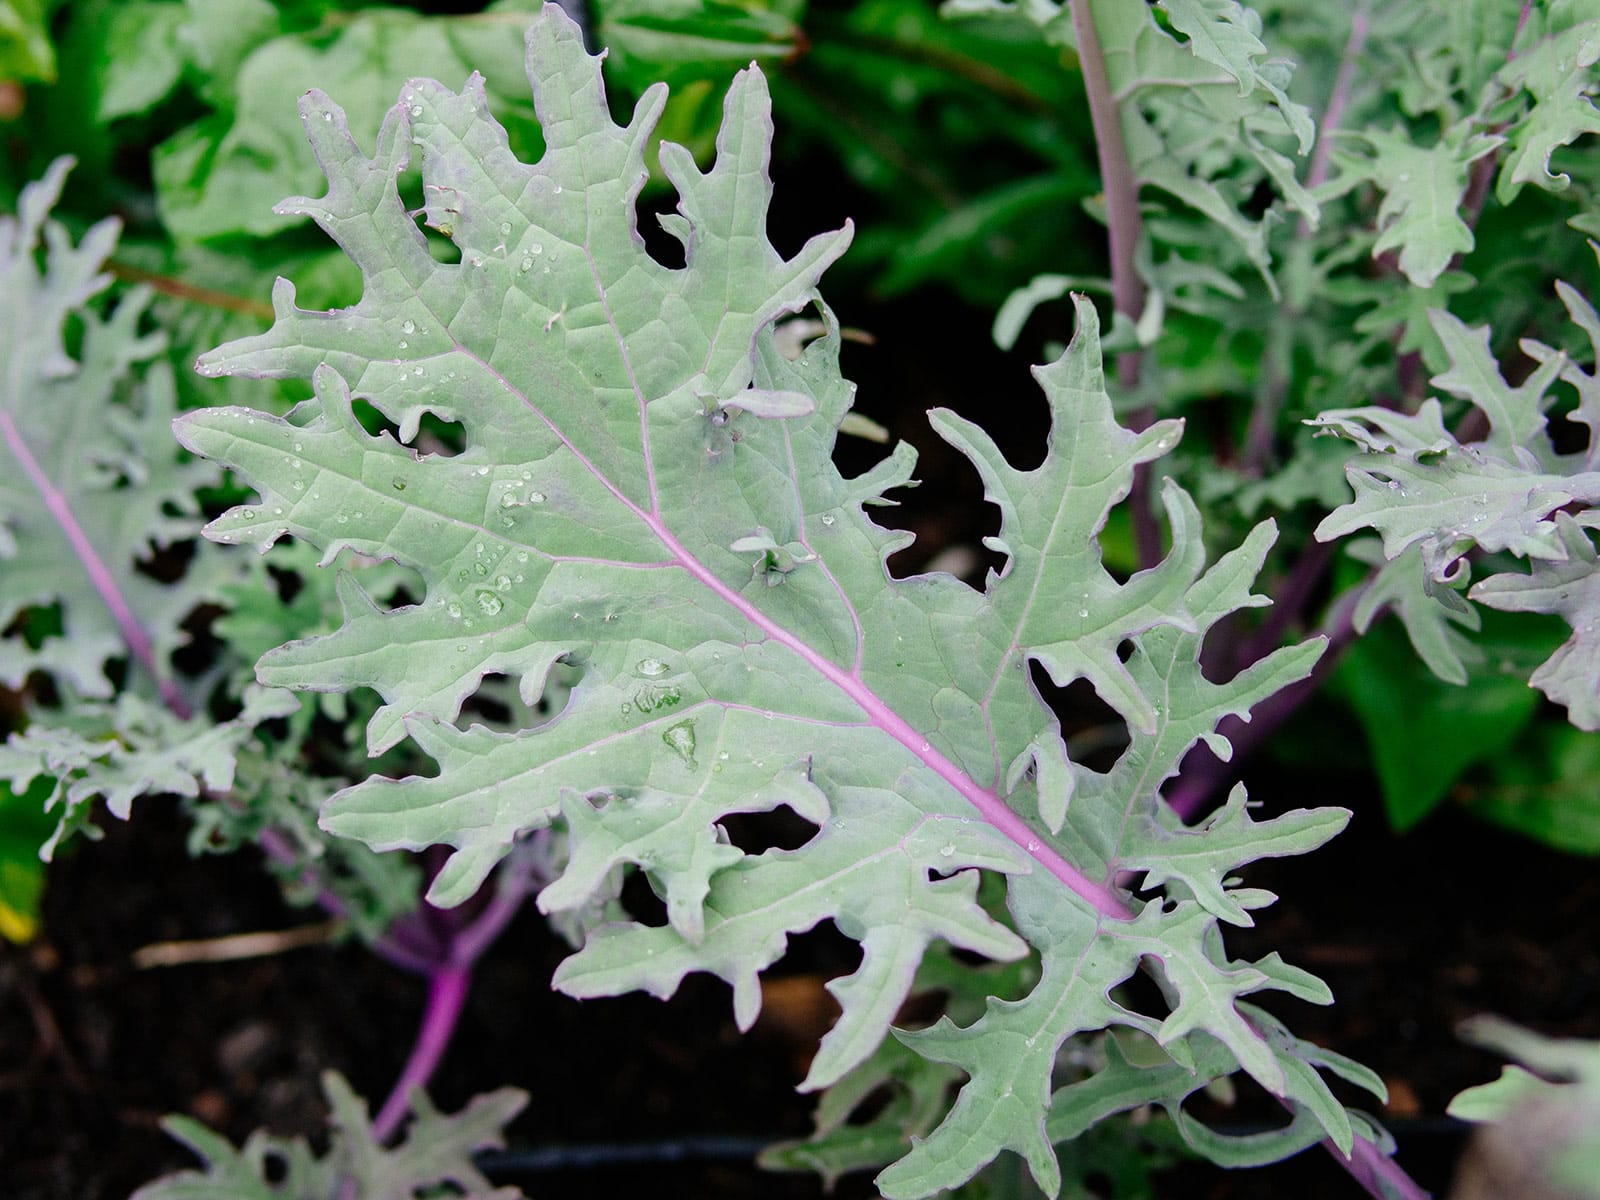 Close-up of Red Russian kale leaf with water droplets on it